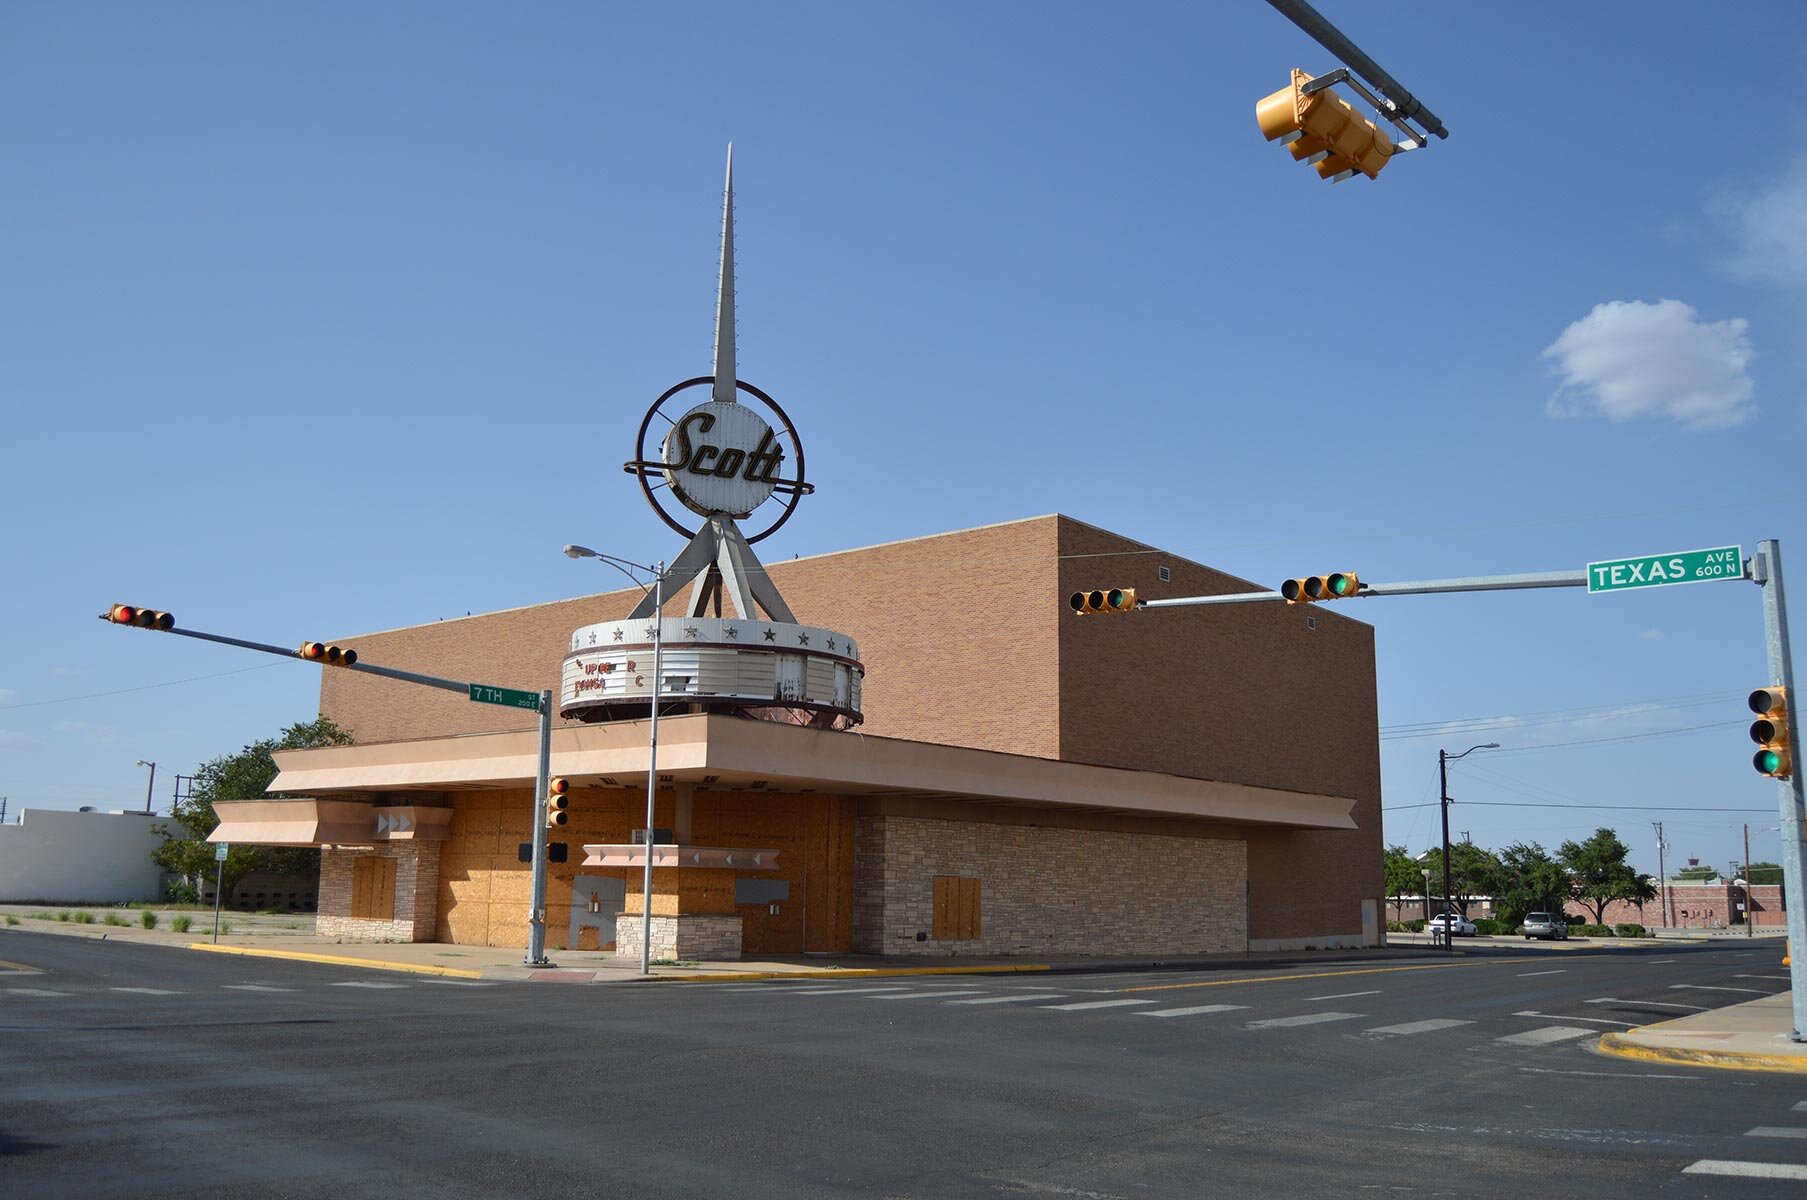 Scott Theater, Texas and 7th St, Odessa TX, July